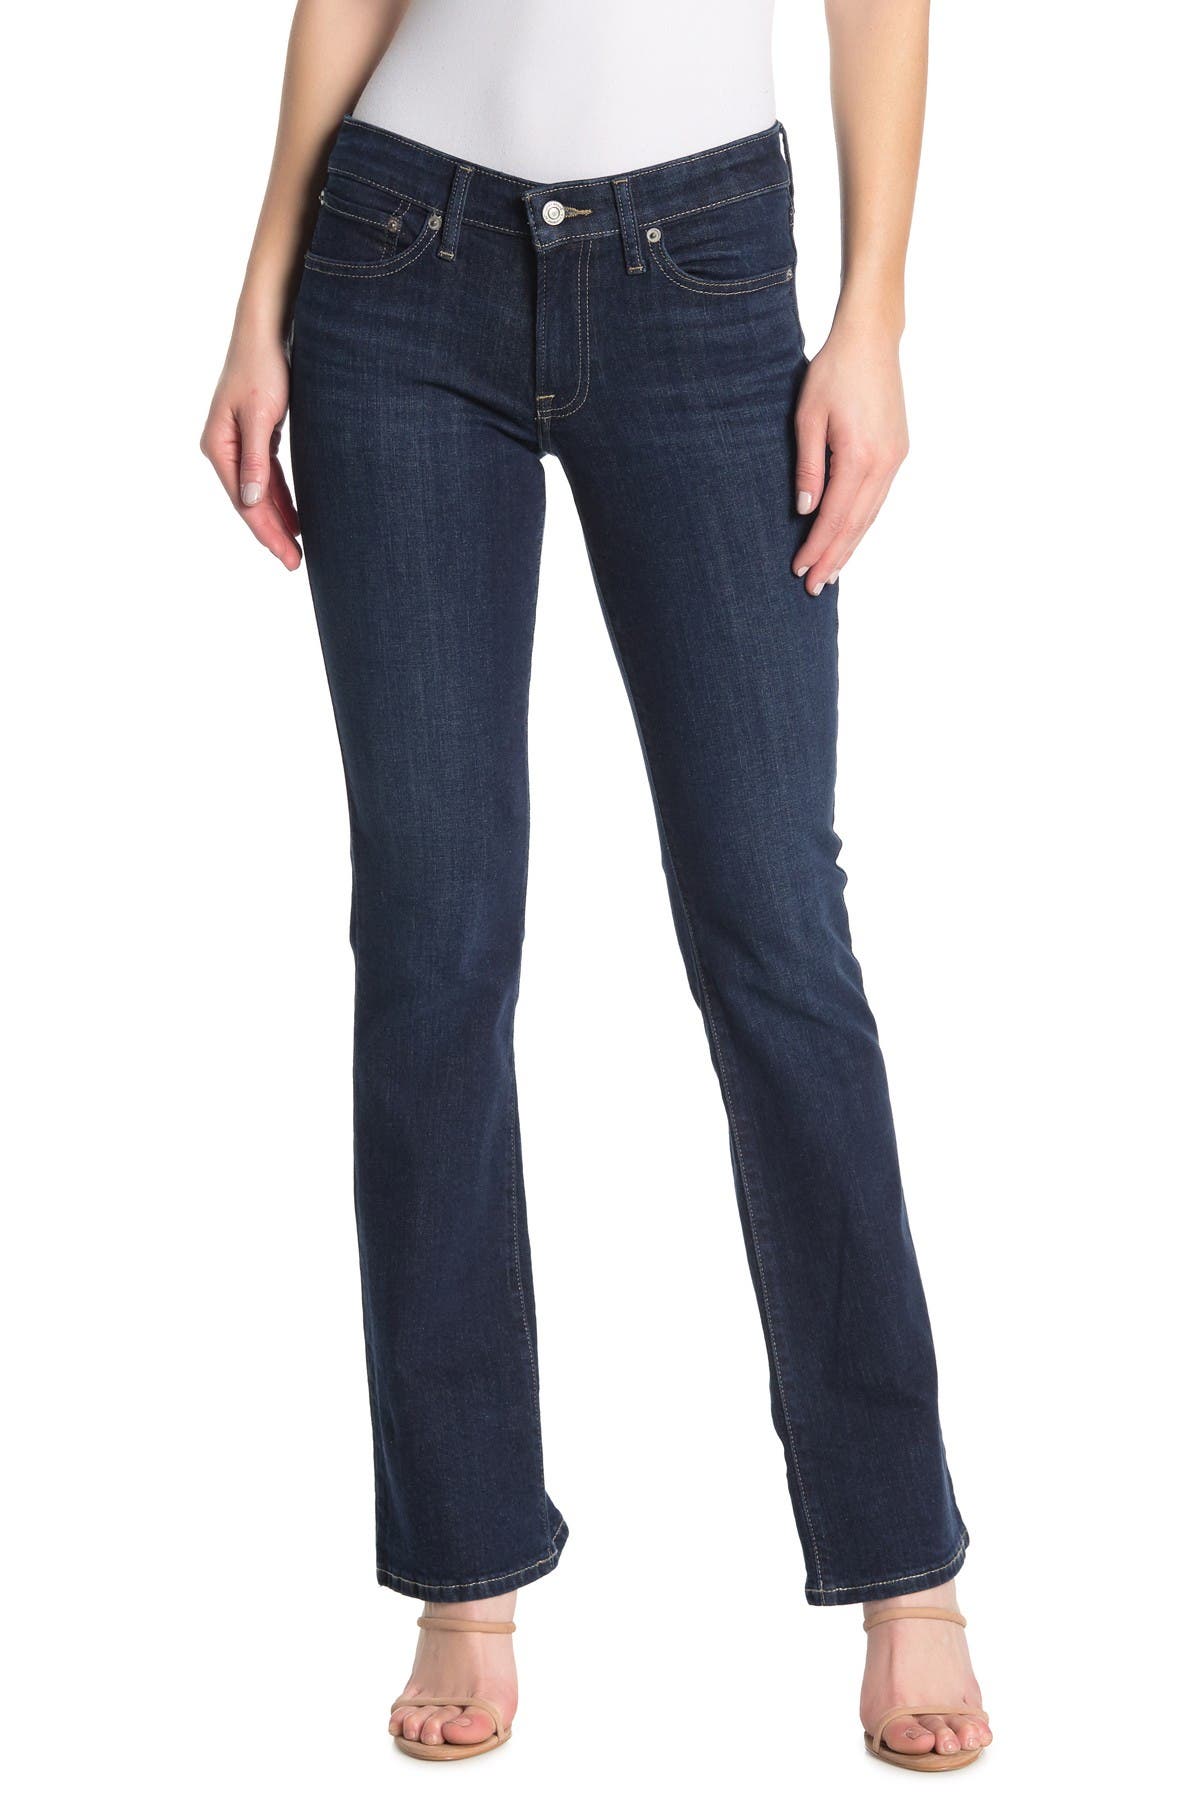 lucky brand sweet bootcut jeans